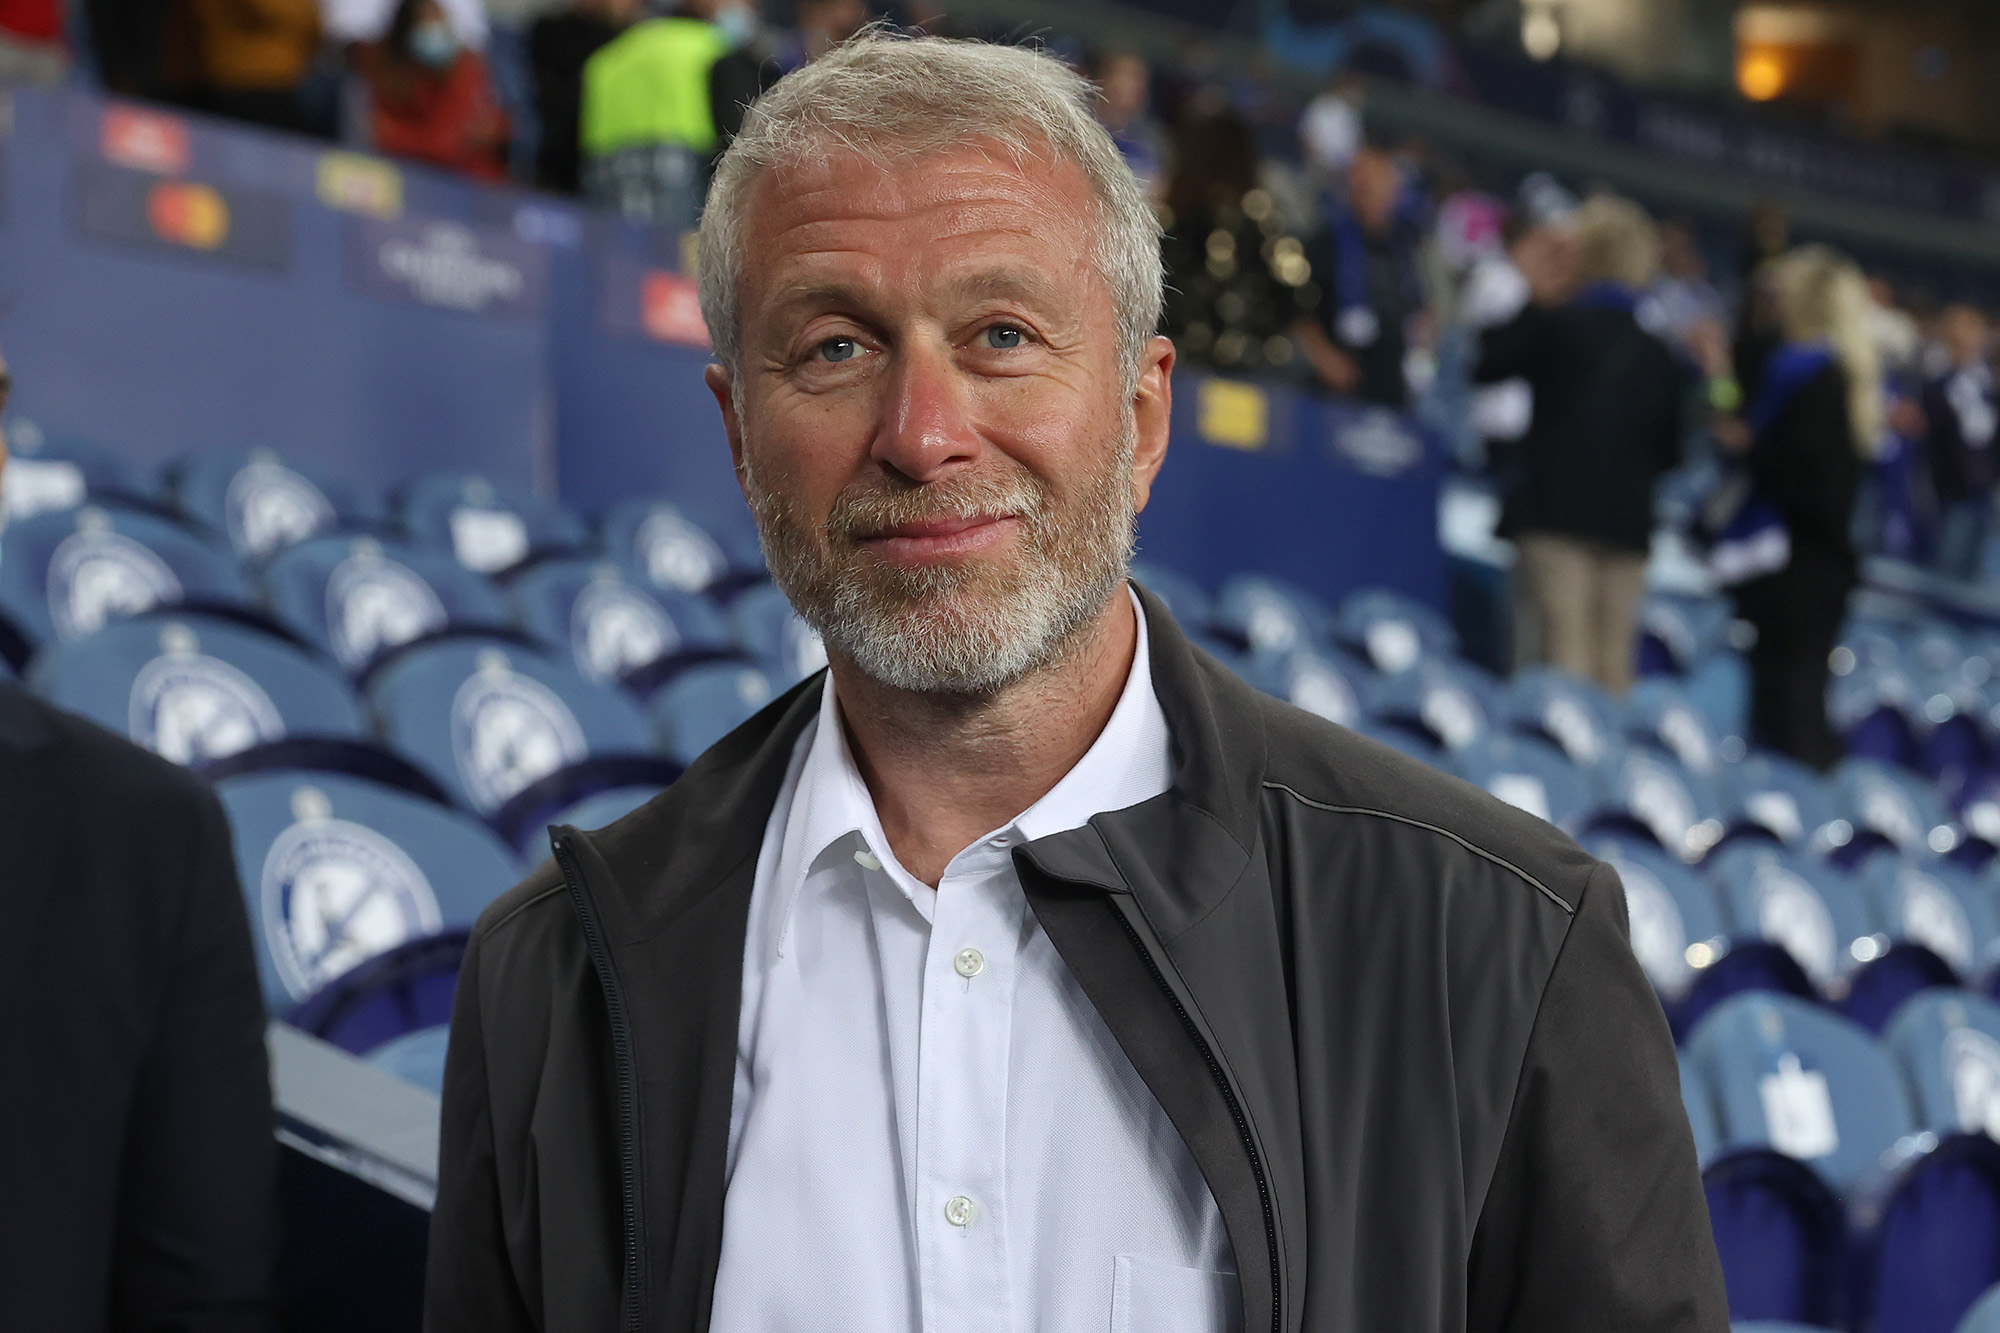 Roman Abramovich at the UEFA Champions League Final between Manchester City and Chelsea FC at Estadio do Dragao in Porto, Portugal, on May 29, 2021.